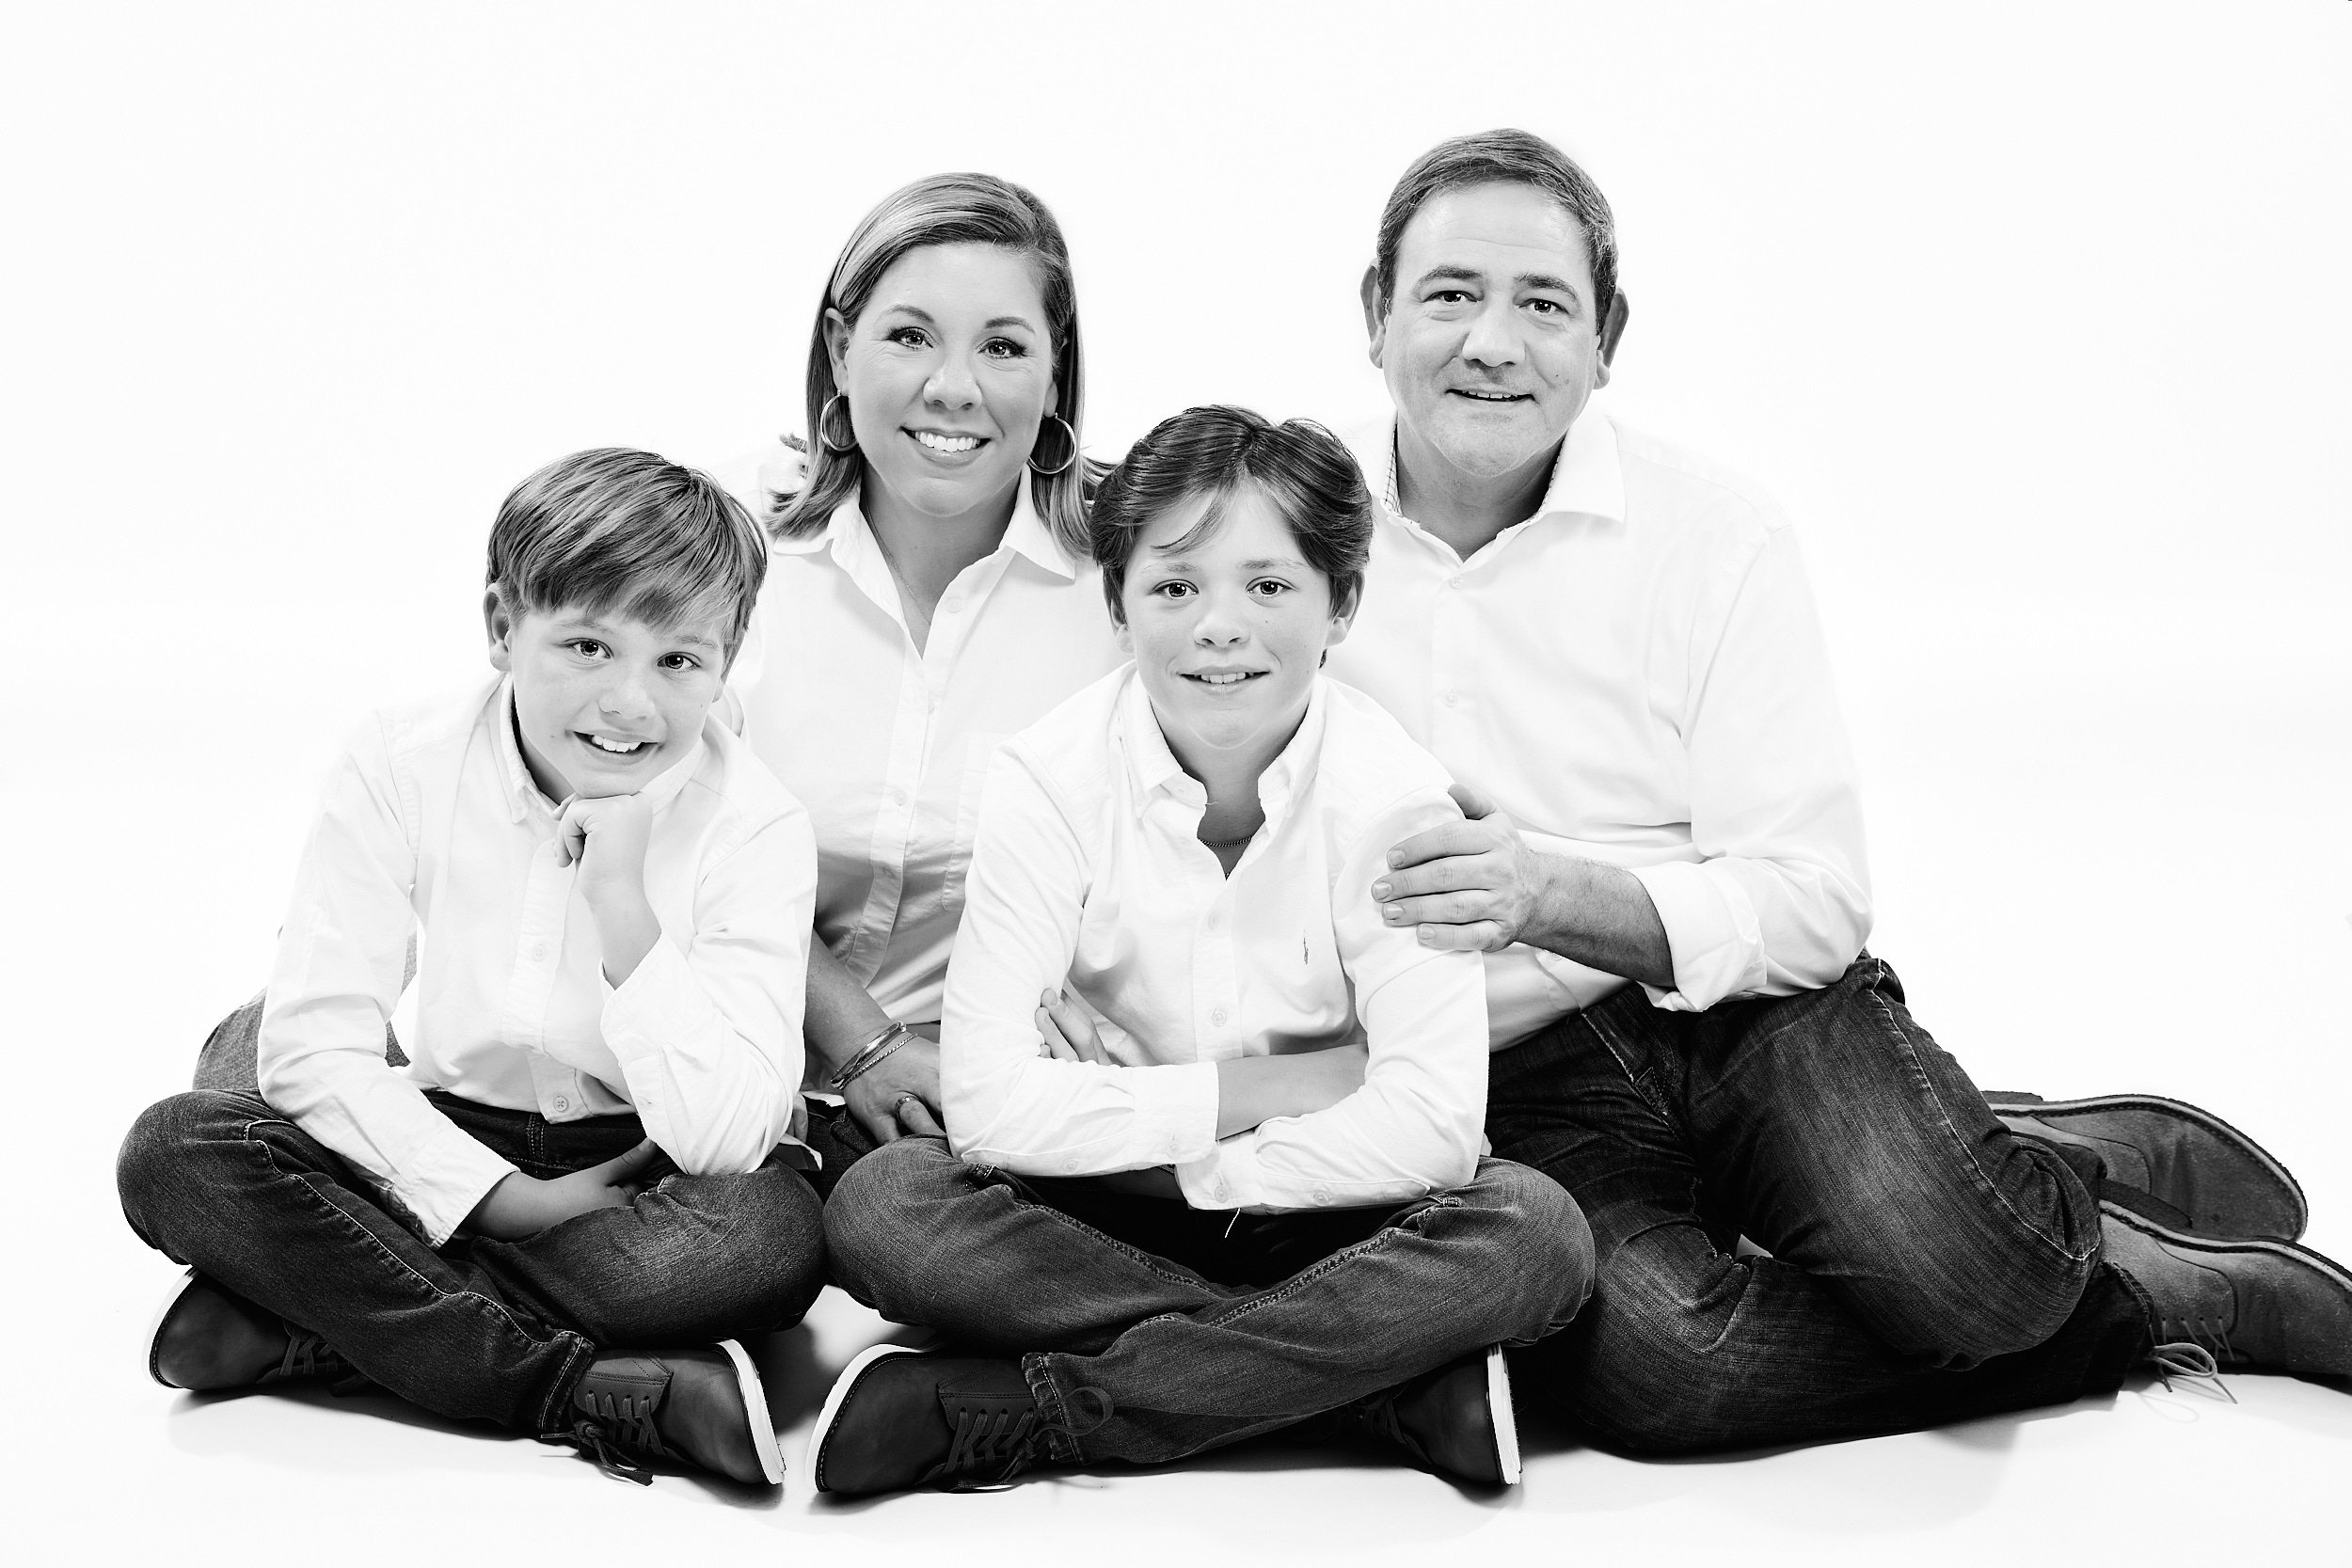  THE WOODLANDS, TEXAS - DECEMBER 2022: Emily Braud is posing for high key black and white portraits with her husband and two sons. They wear white shirts and blue jeans and look happy and healthy. 